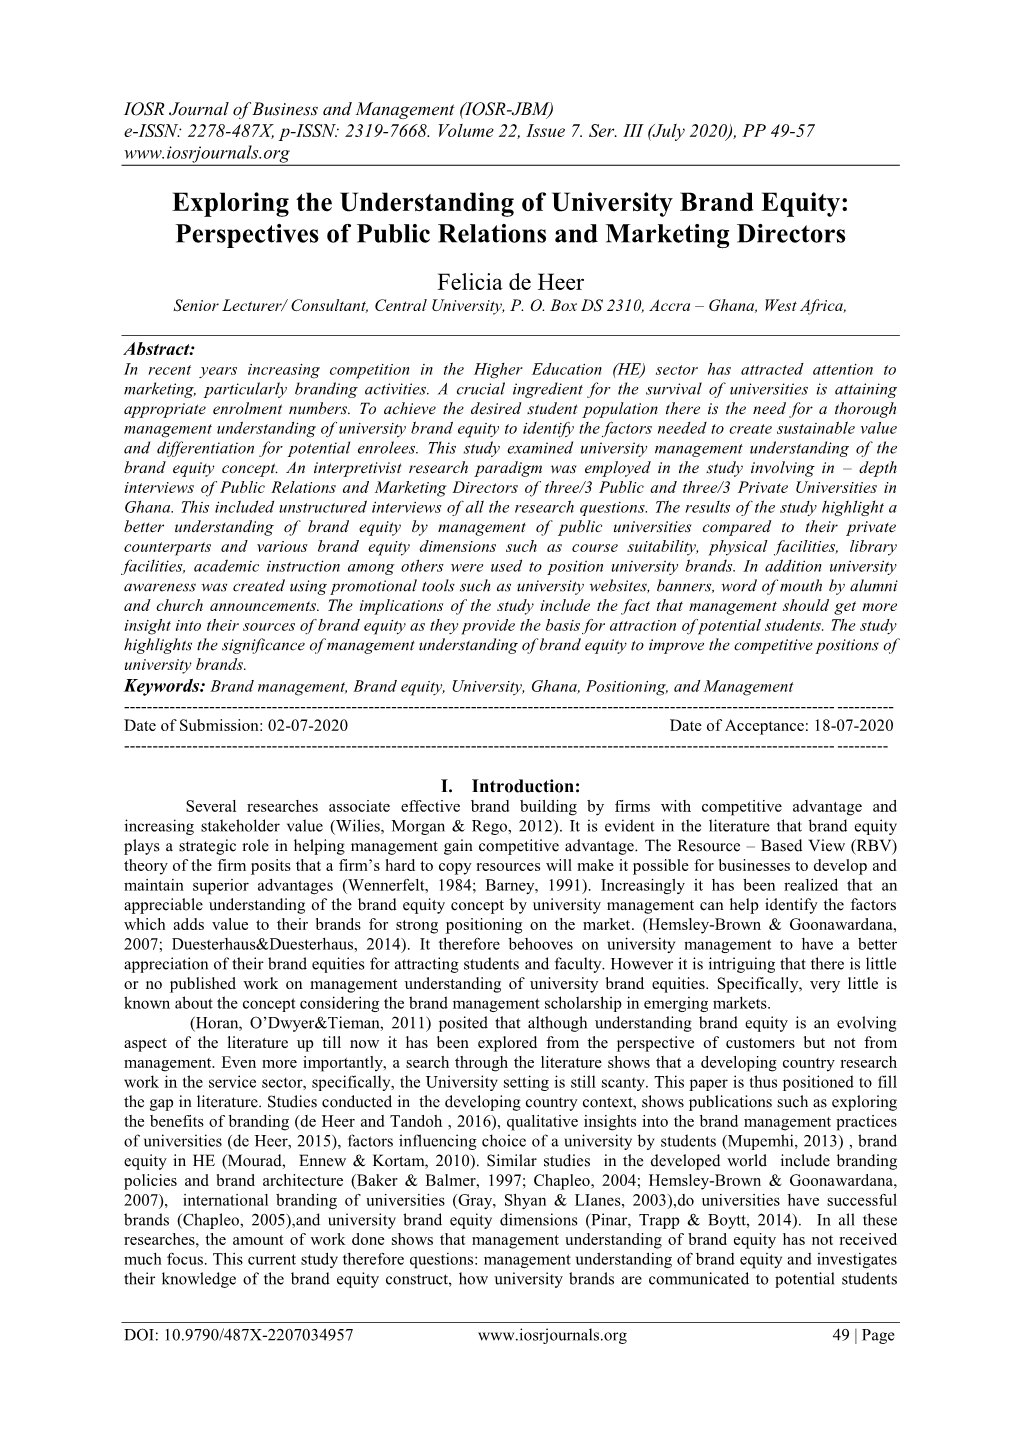 Exploring the Understanding of University Brand Equity: Perspectives of Public Relations and Marketing Directors